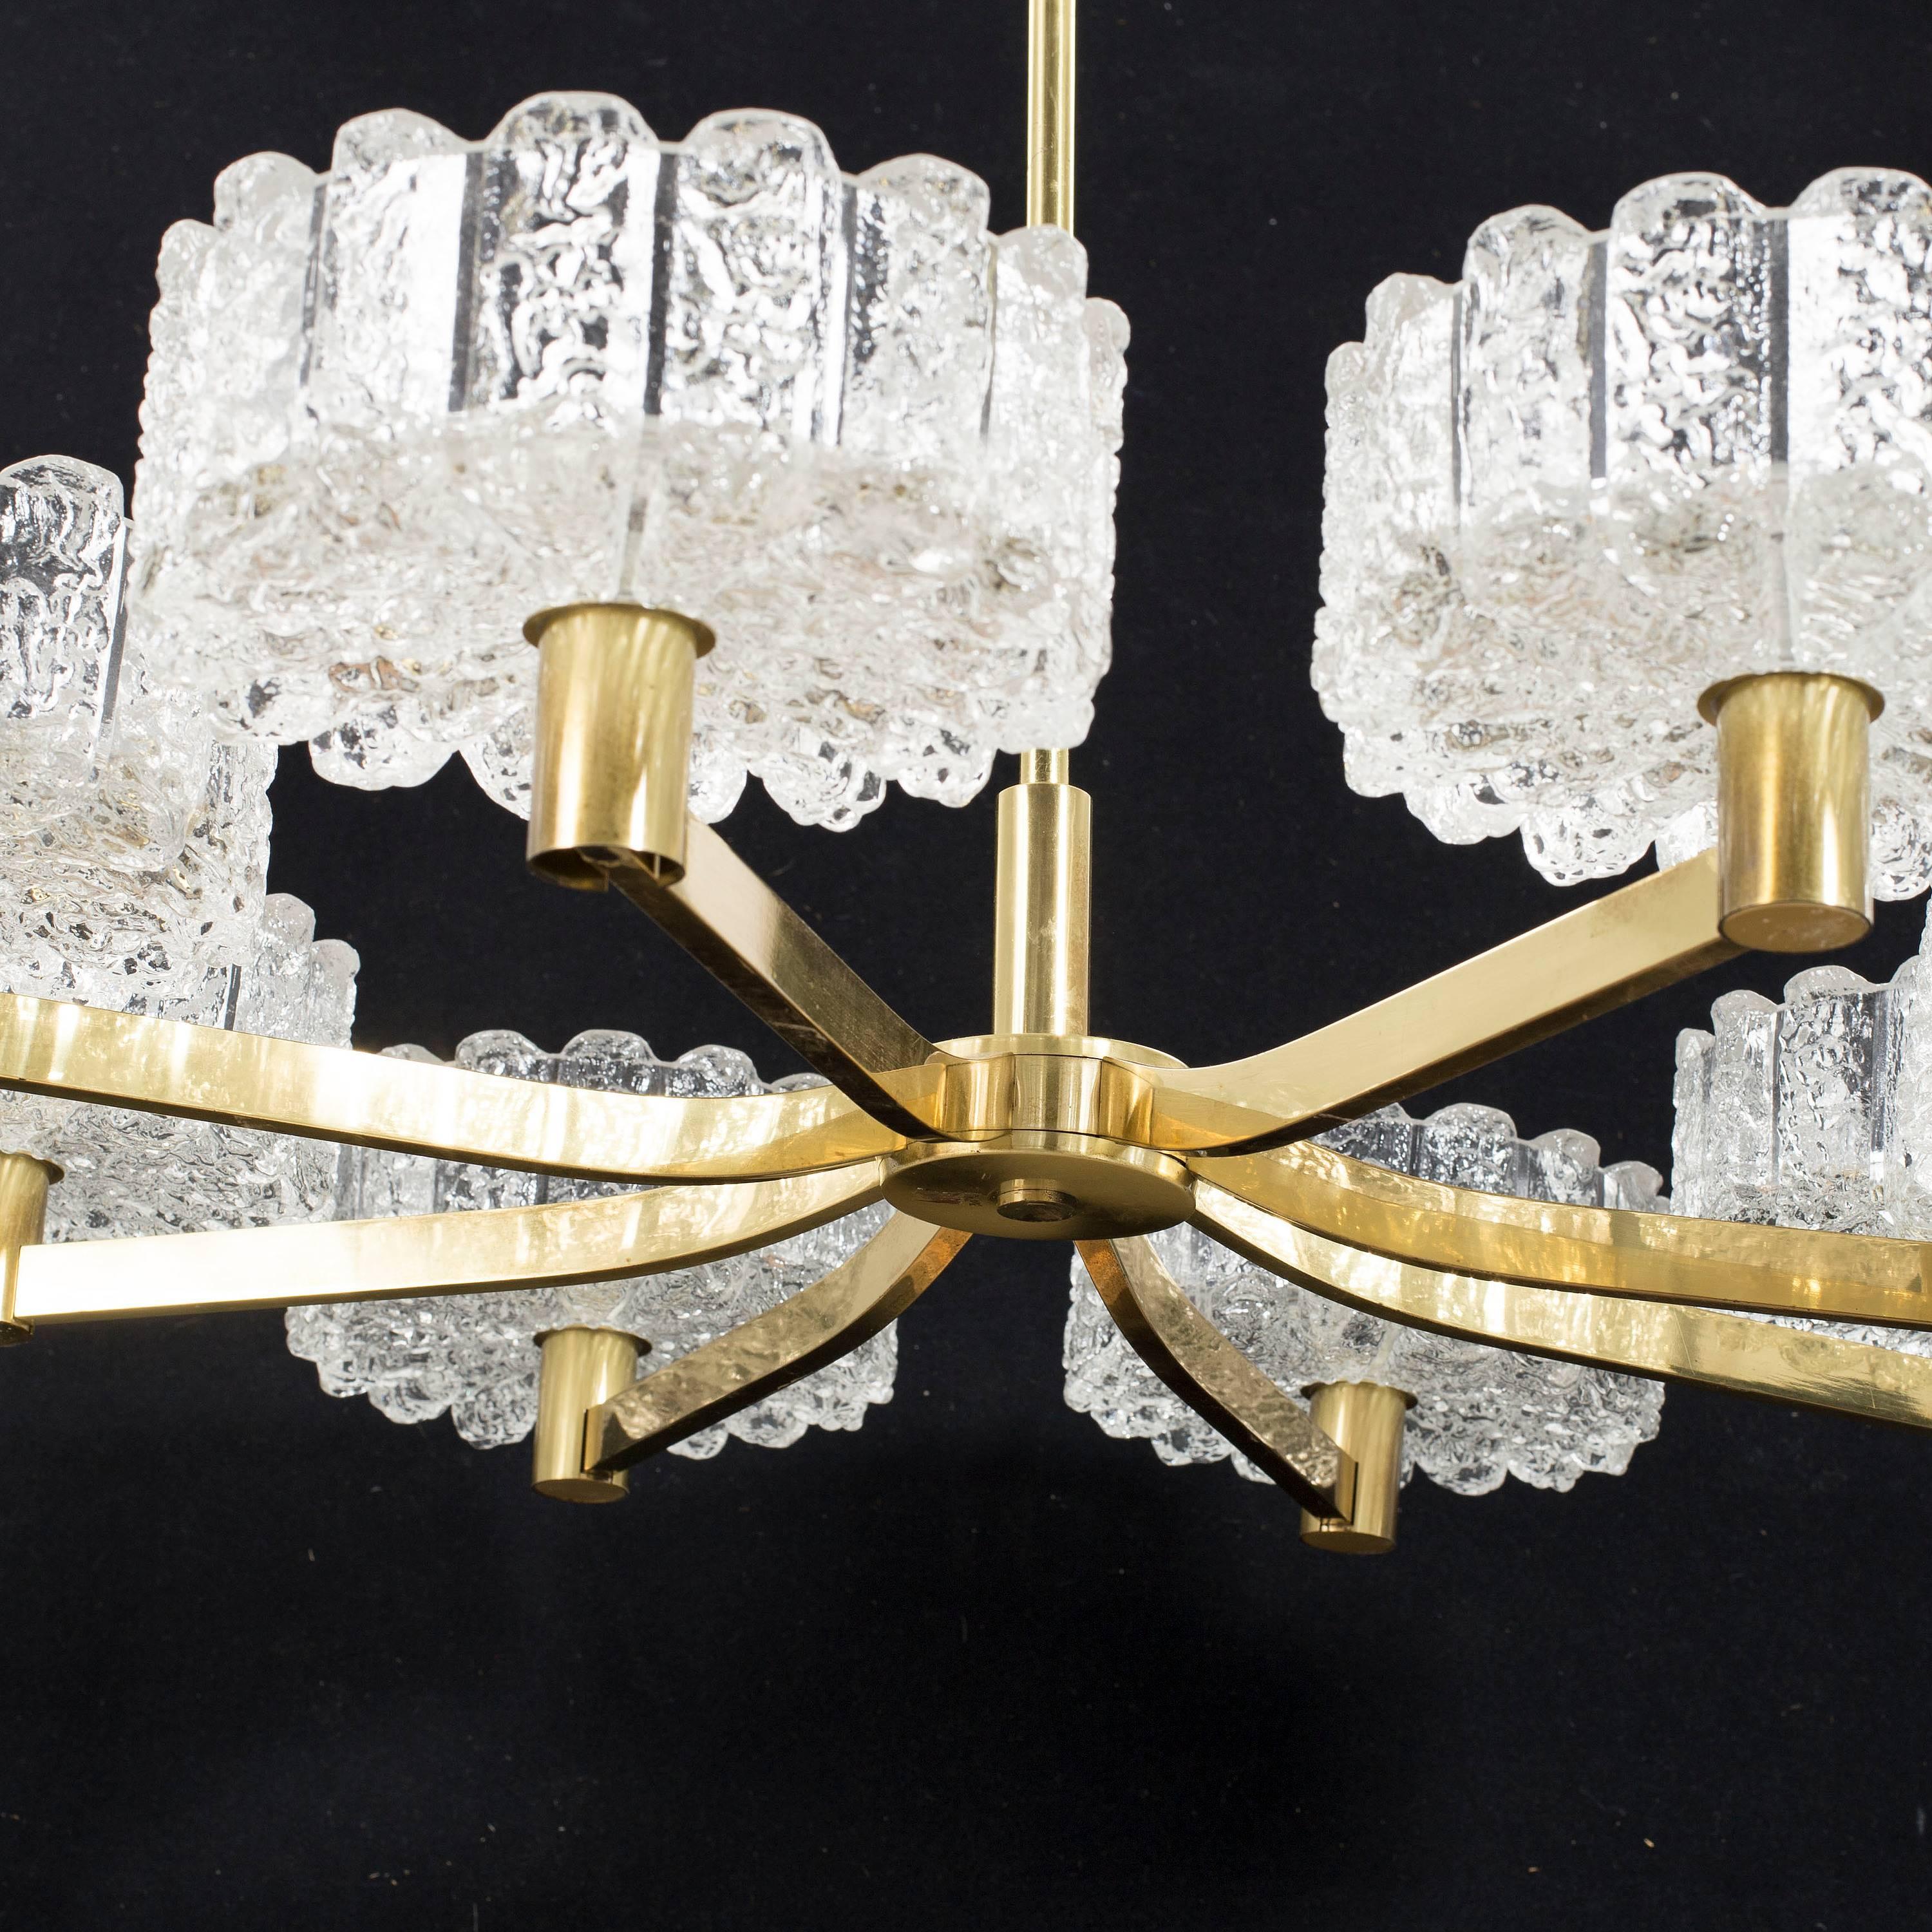 Large Chandelier, Orrefors attributed, Sweden, circa 1960.
Crystal bawls on brass hardware.
Existing wiring, rewiring available upon request.